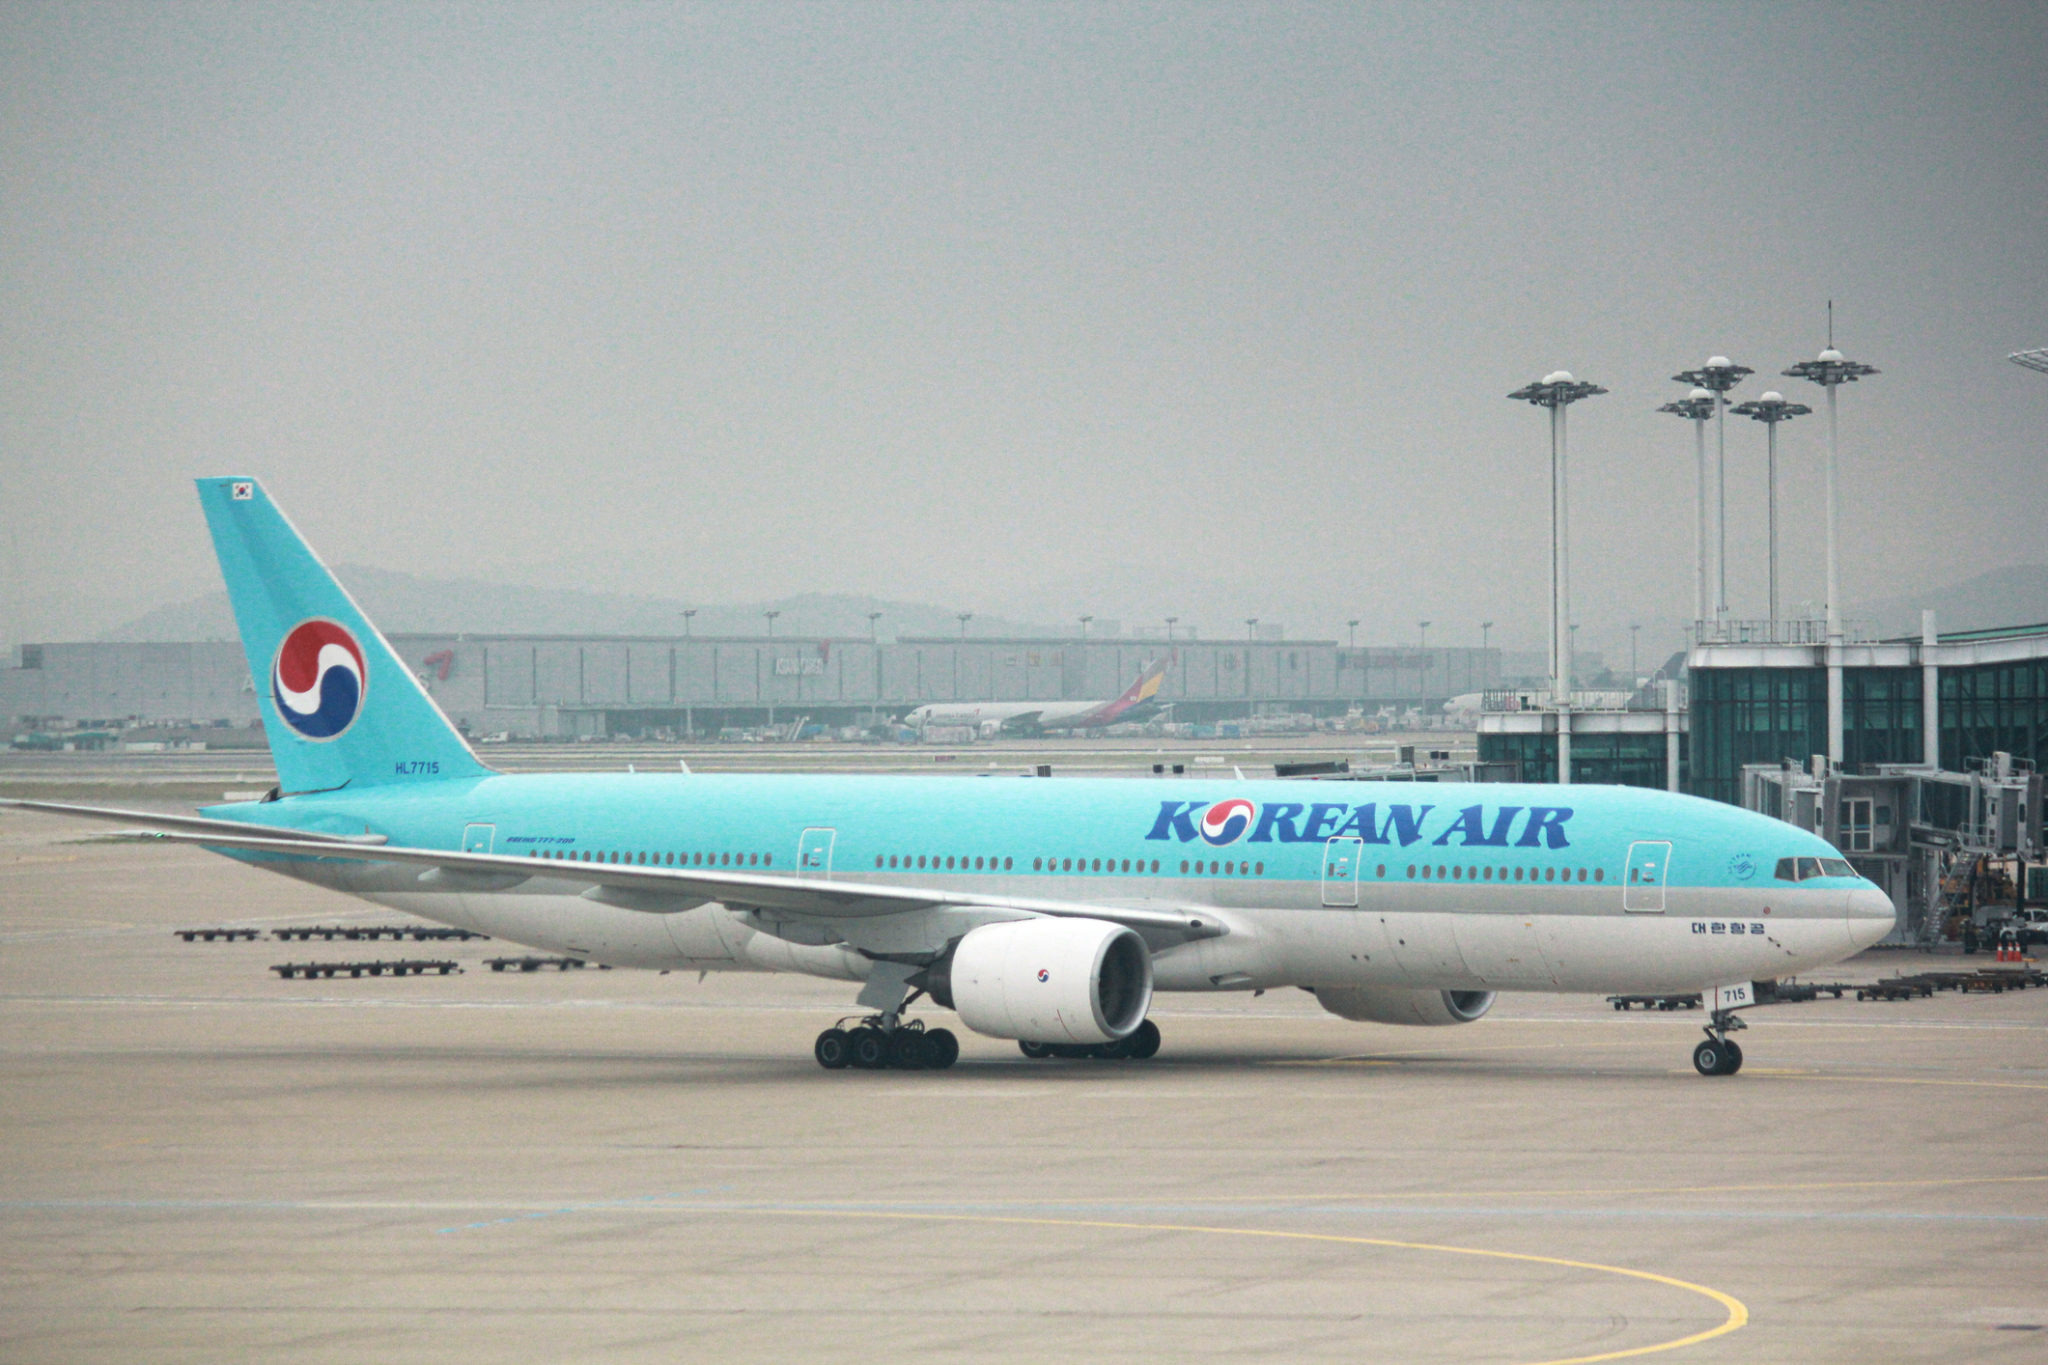 Korean Air Pilots Go on Unpaid Leave to Save Airline